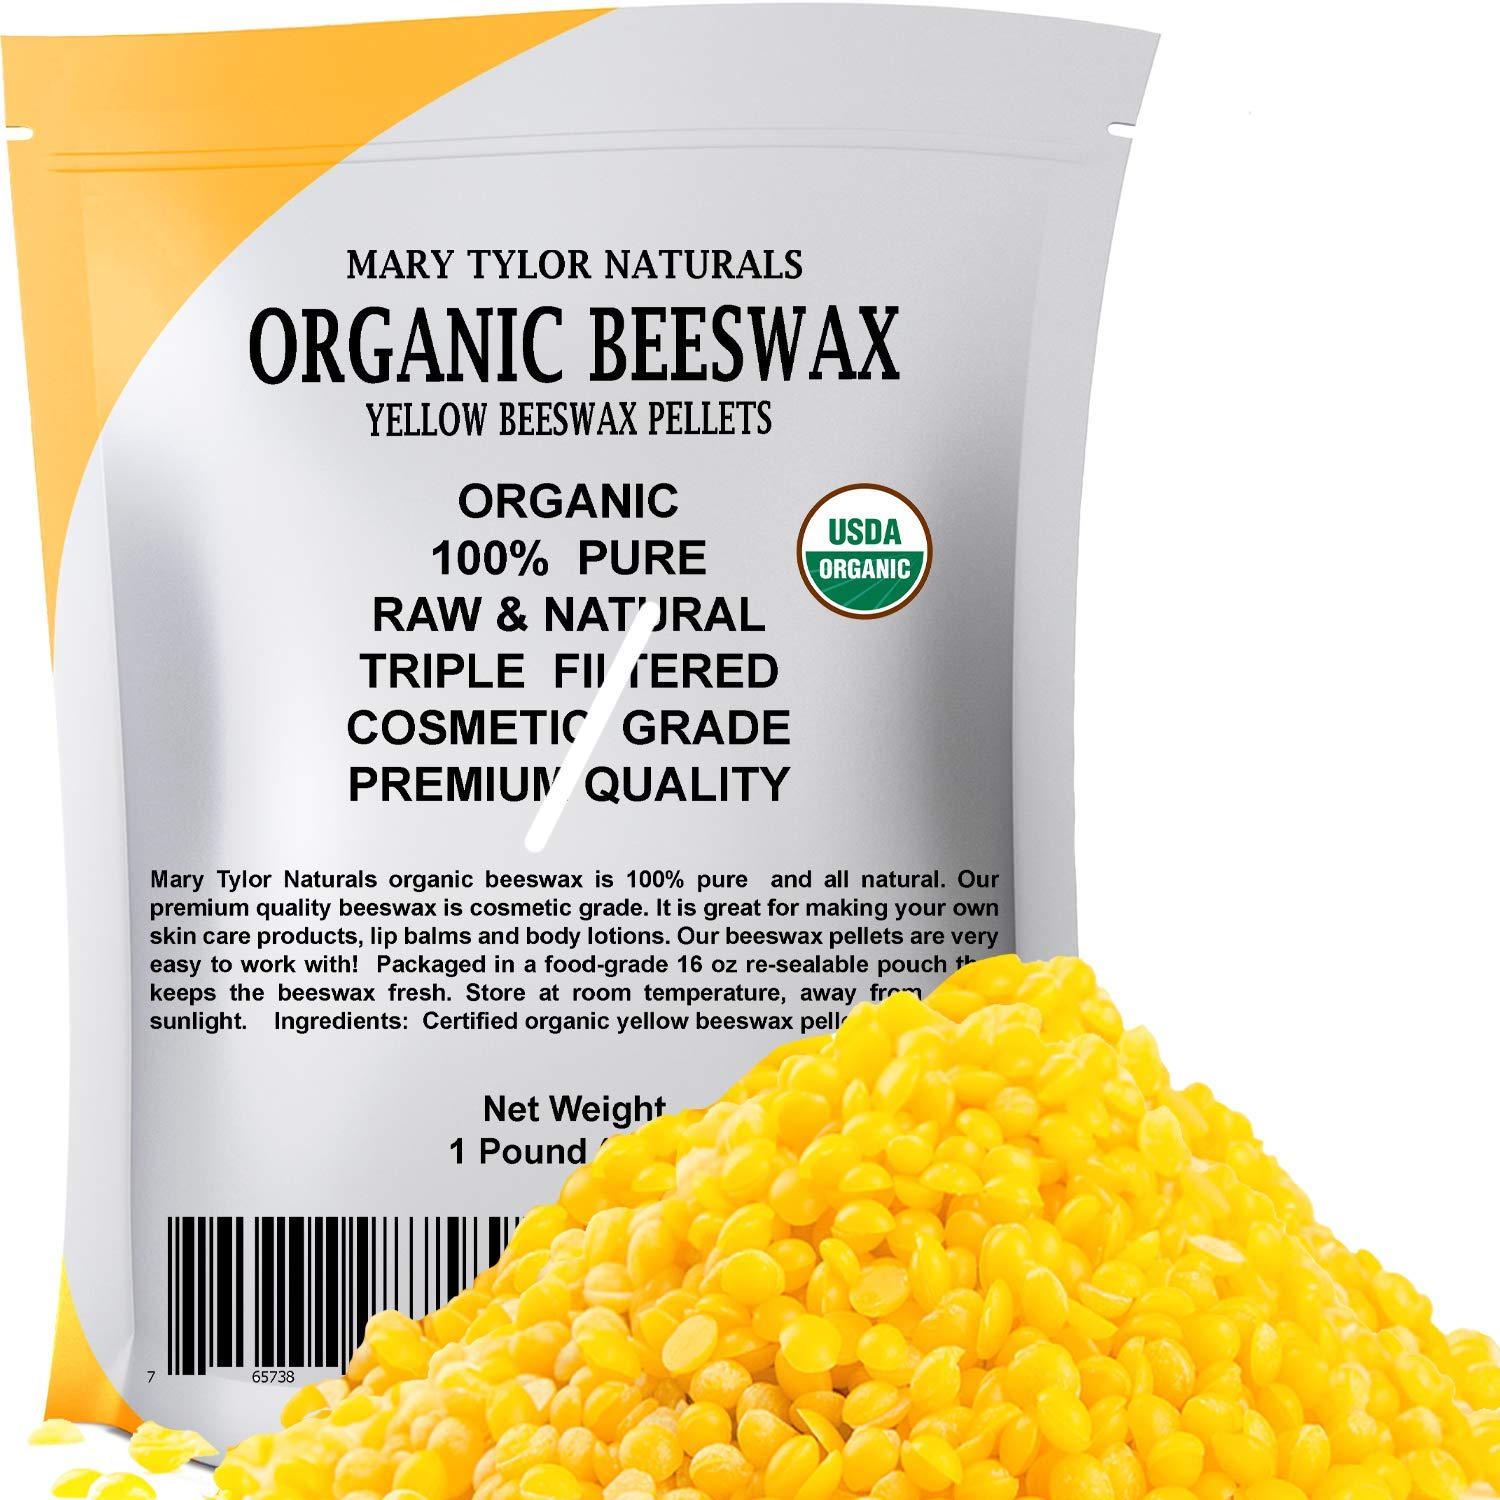 Organic Yellow Beeswax Pellets 1lb, USDA Certified by Mary Tylor Naturals,  Premium Quality, Cosmetic Grade, Triple Filtered Bees Wax Pastilles, for  DIY Lip Balm Recipes Body Creams Lotions Deodorants